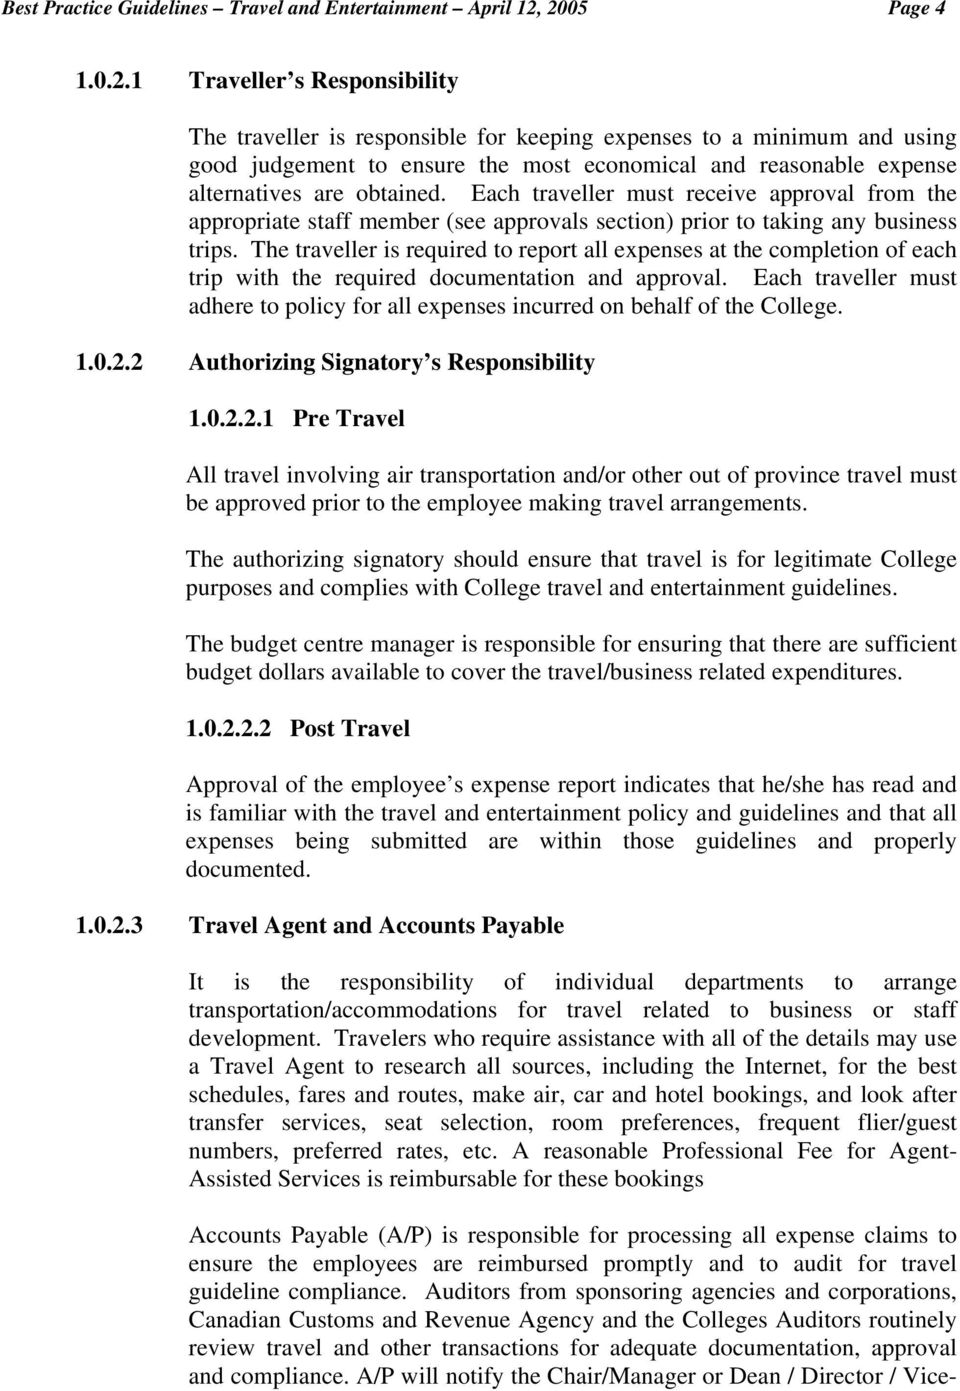 Each traveller must receive approval from the appropriate staff member (see approvals section) prior to taking any business trips.